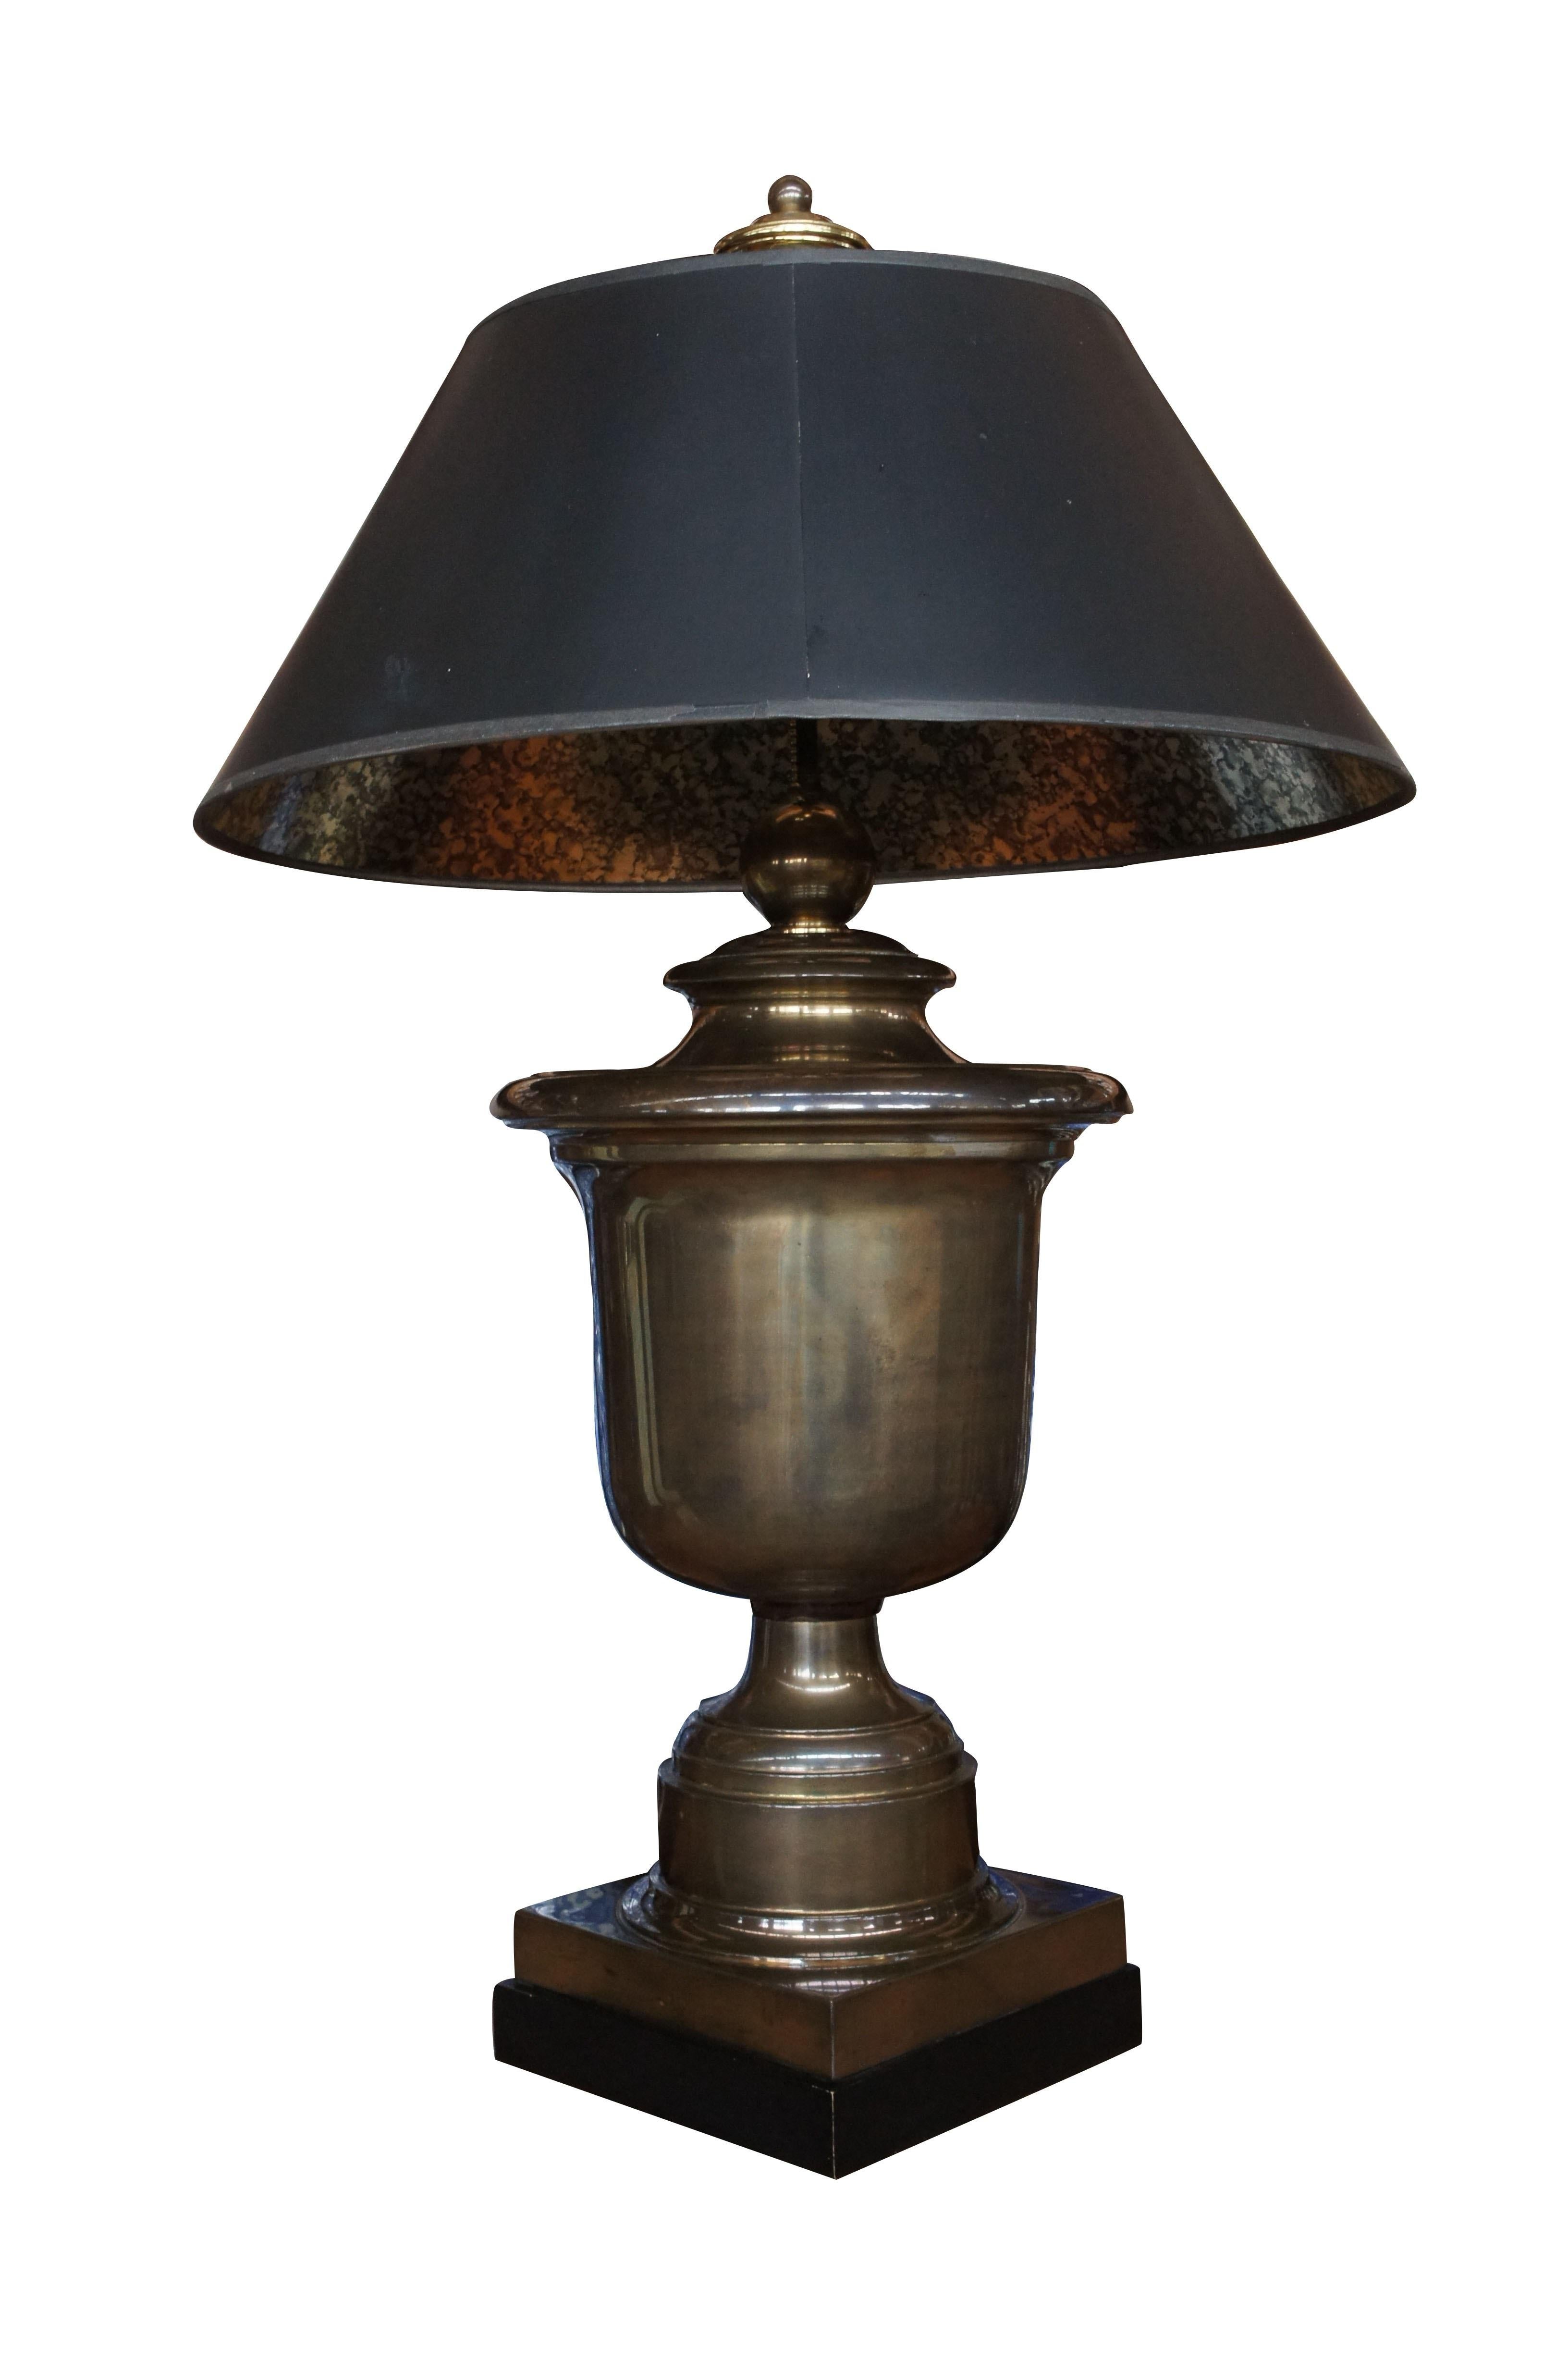 A classical yet regal design by Chapman. Made from brass with black tapered shades and foiled underside. A great addition to any setting.

Measures: 12.5